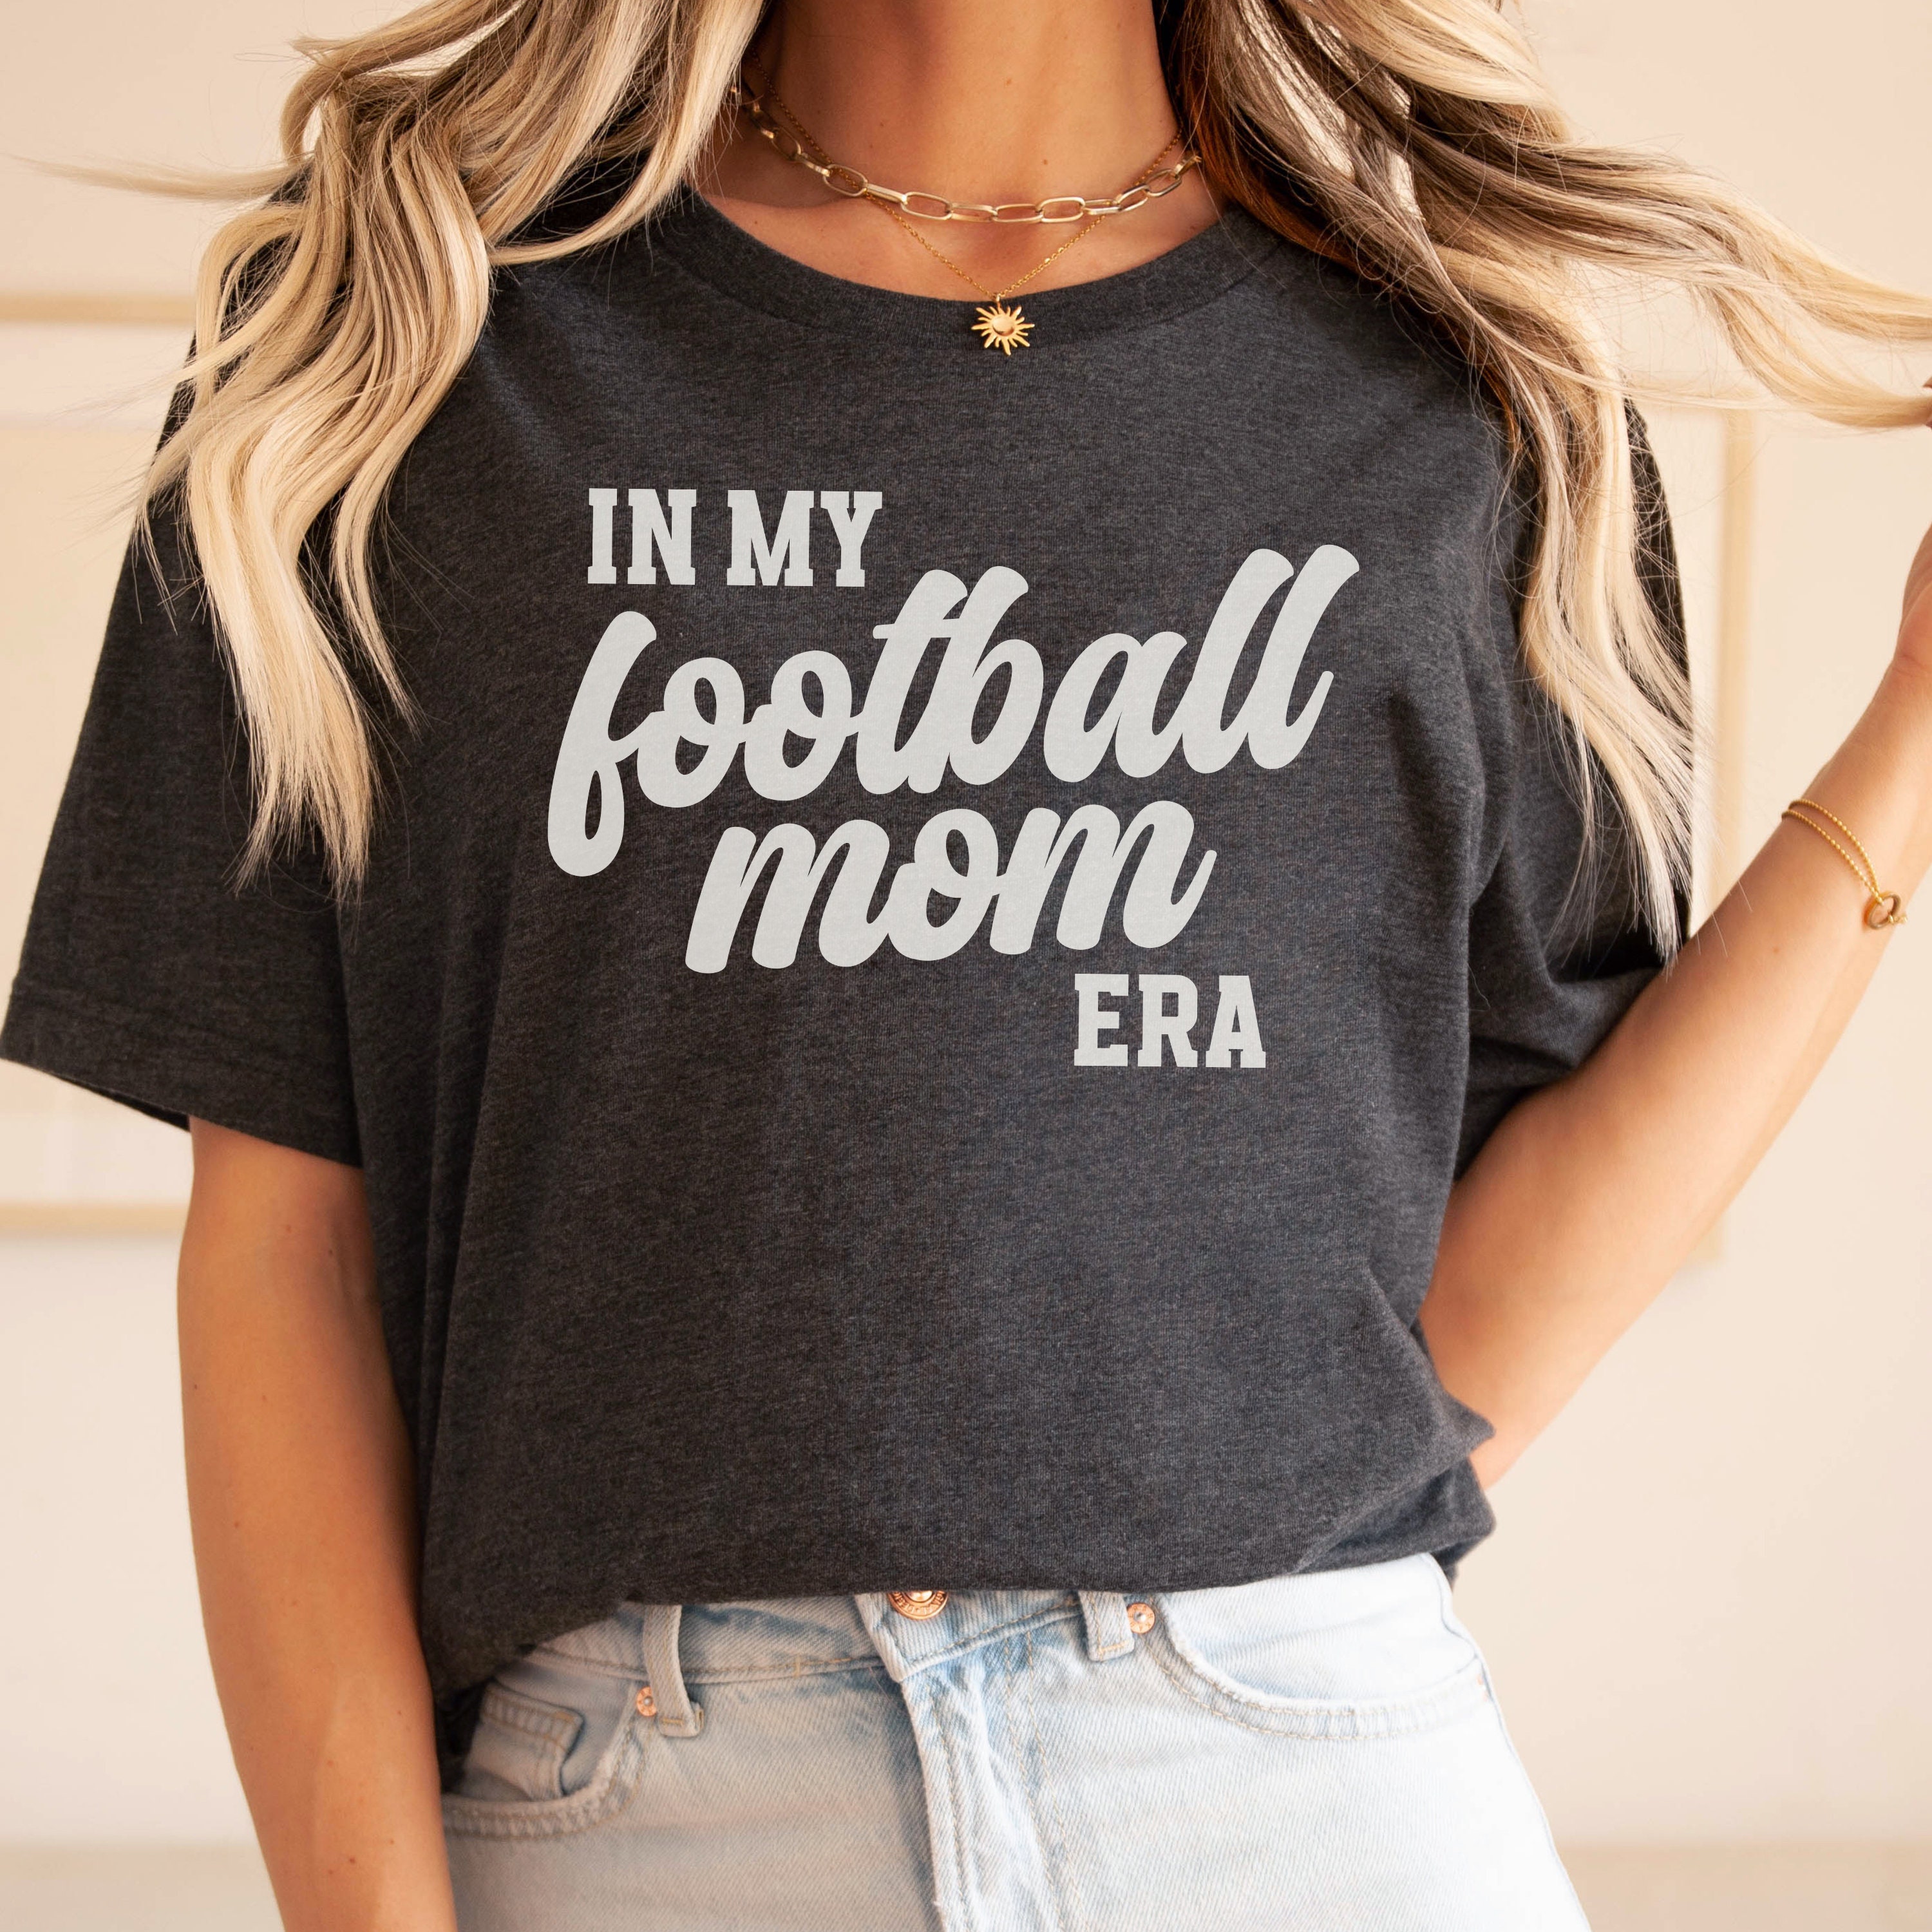 DIY Party Mom: 10 Football Mom T-shirts to Show Your Pride